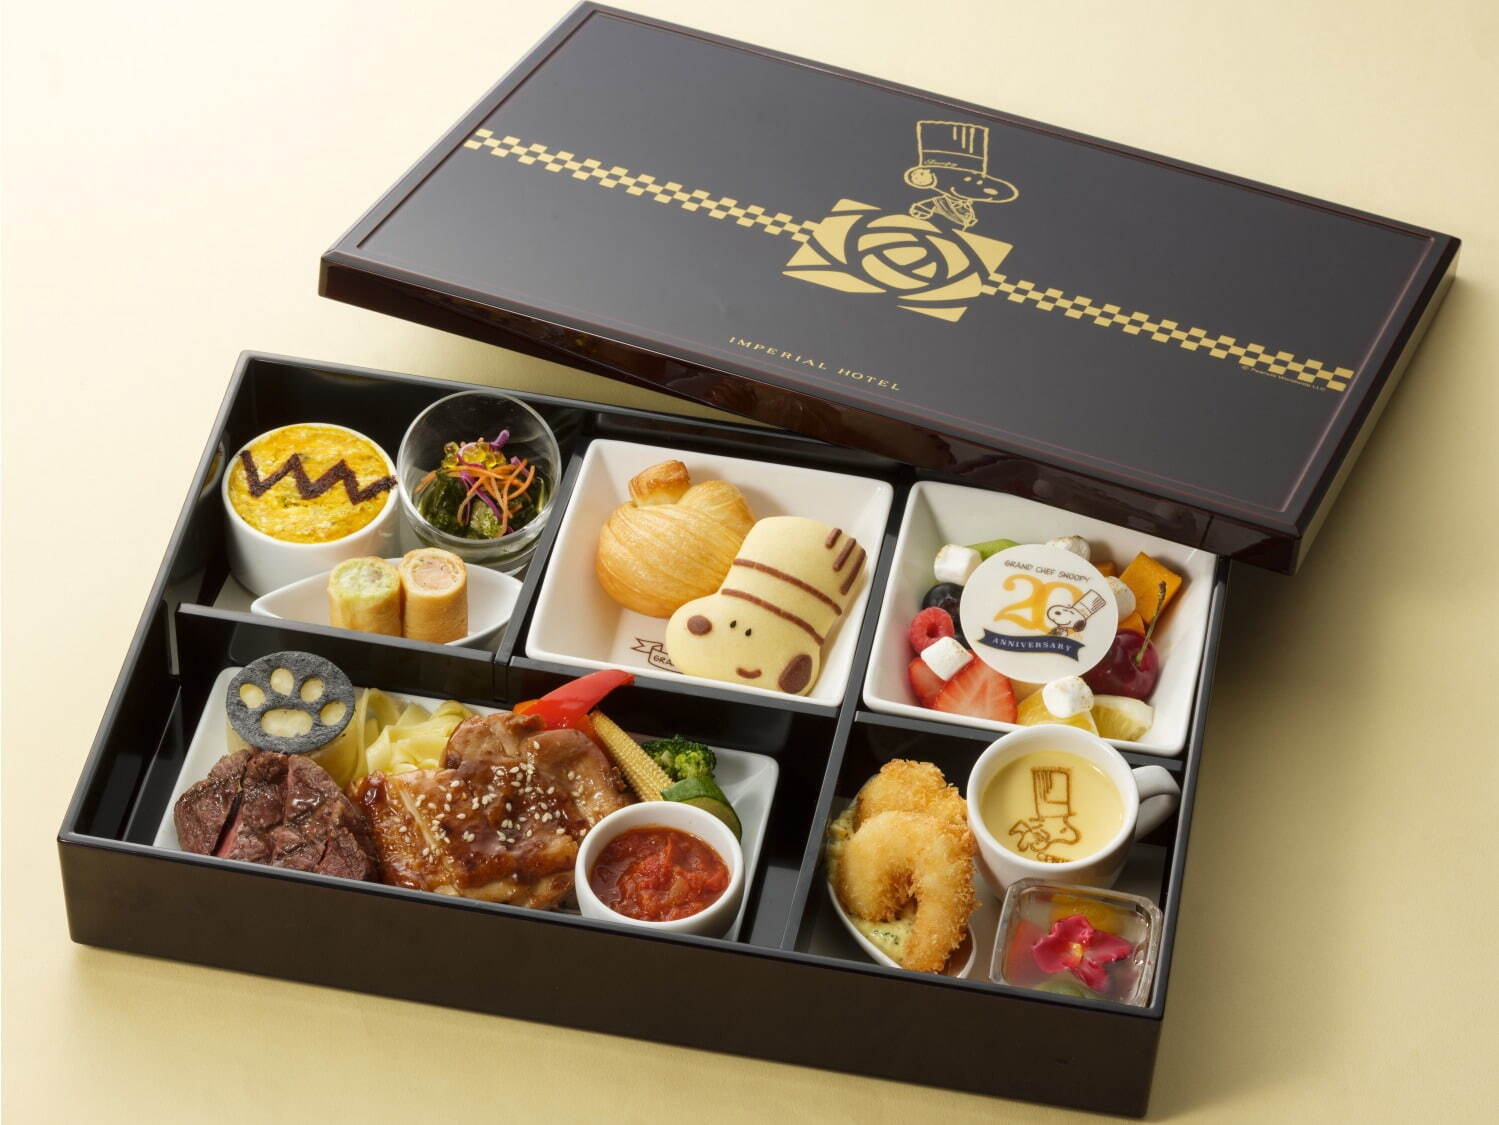 「BENTO by Grand Chef SNOOPY」7,000円(サービス料込)